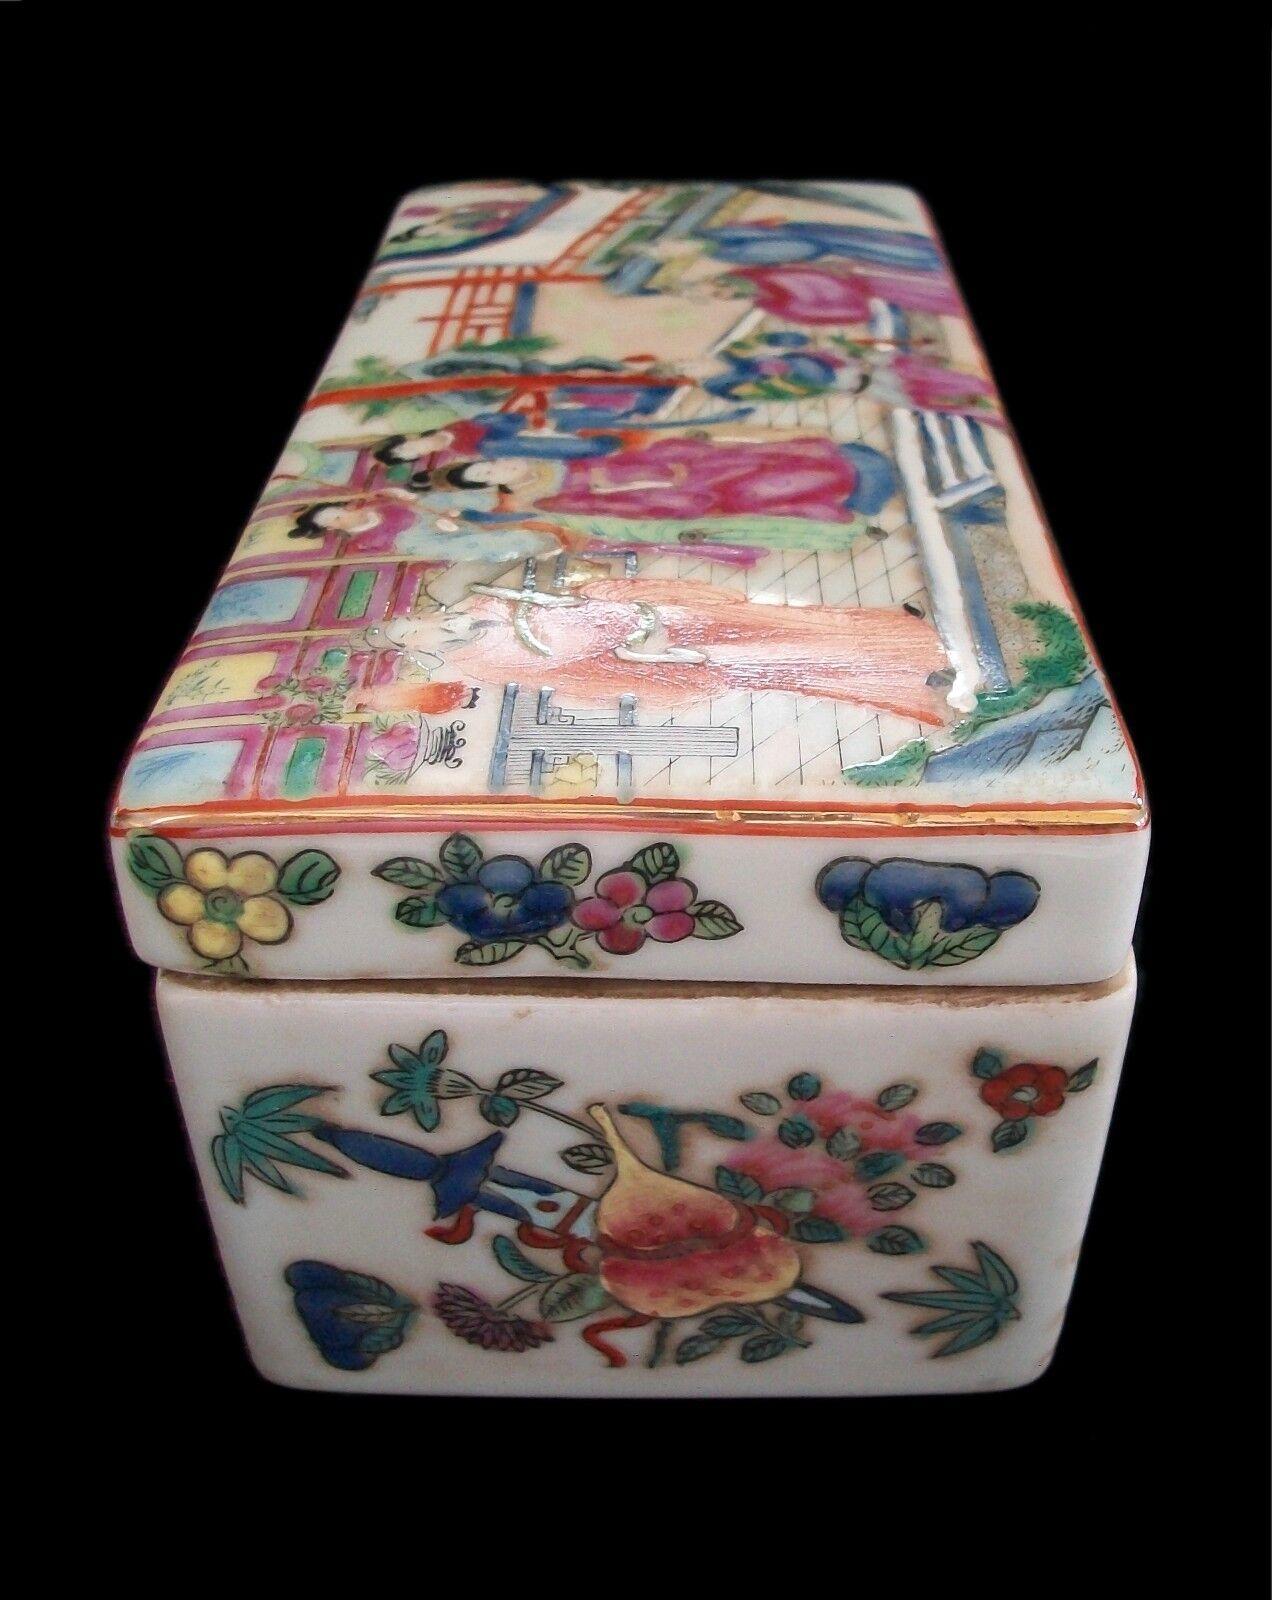 Hand-Crafted Antique Canton Famille Rose Porcelain Box, Signed, China, Late 19th Century